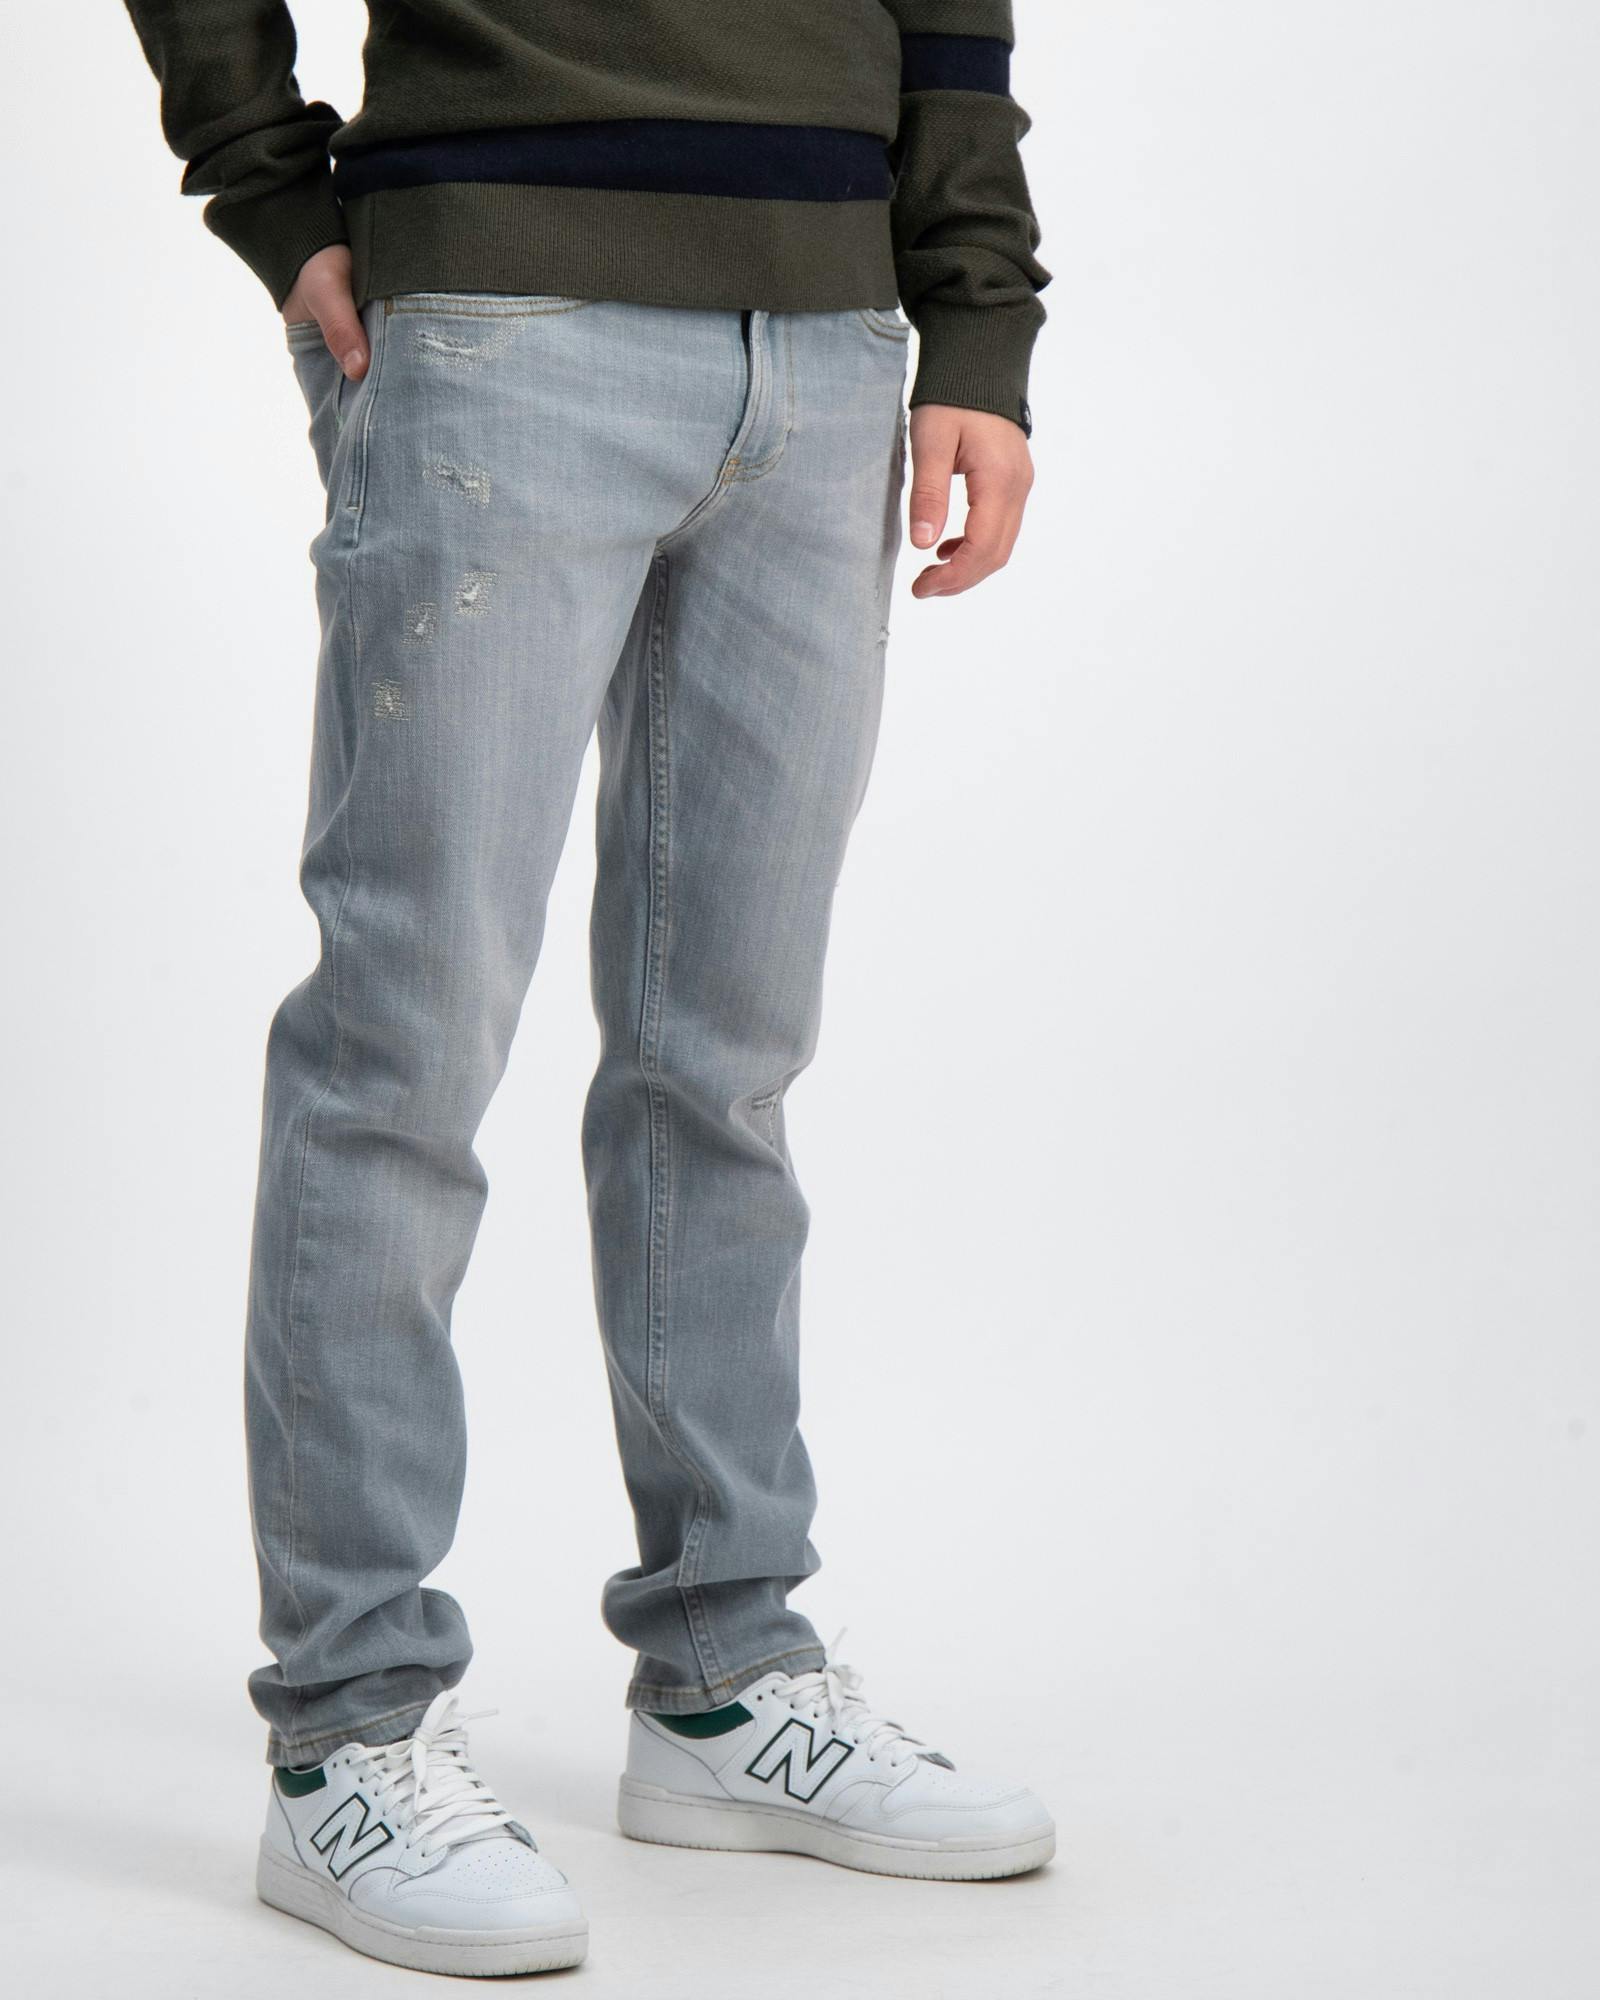 The Drop tapered jeans